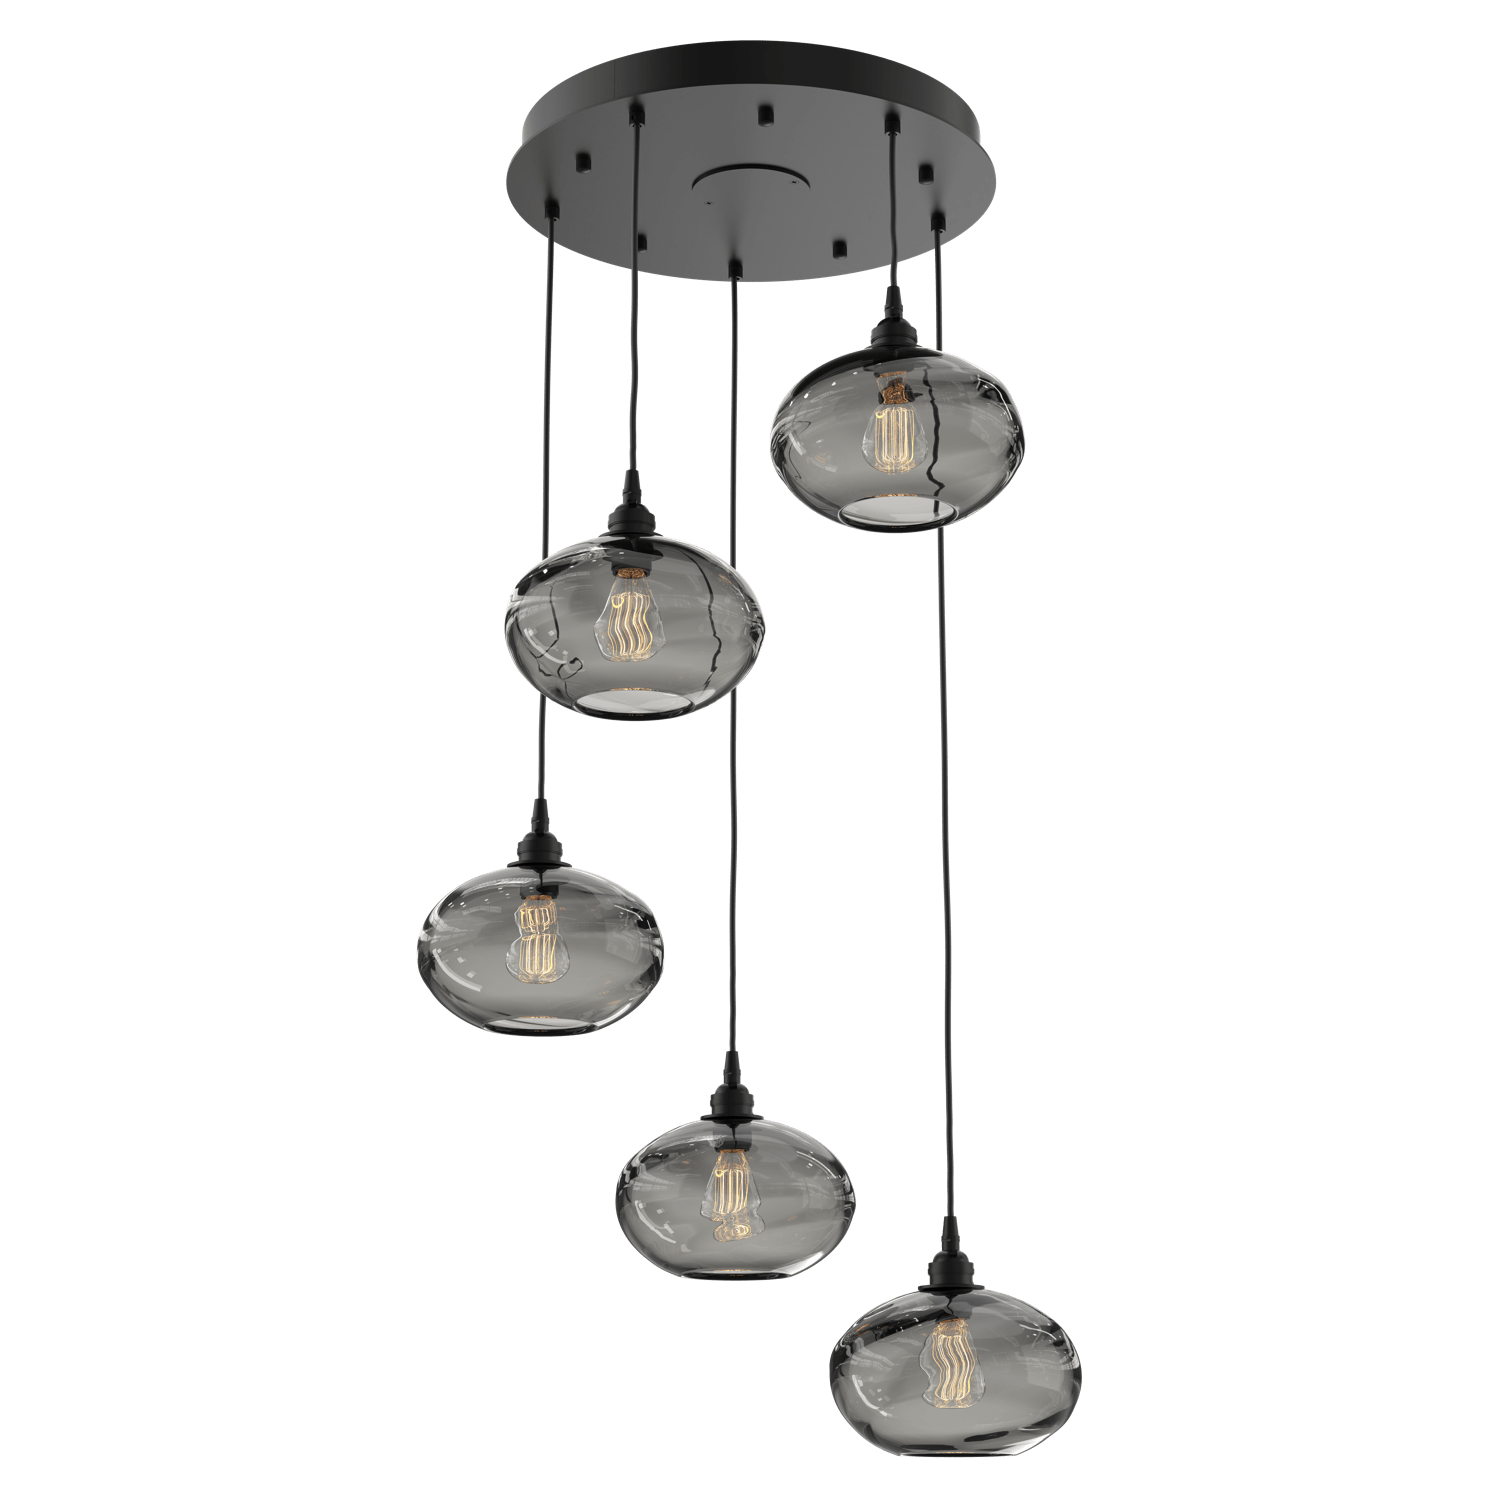 CHB0036-05-MB-OS-Hammerton-Studio-Optic-Blown-Glass-Coppa-5-light-round-pendant-chandelier-with-matte-black-finish-and-optic-smoke-blown-glass-shades-and-incandescent-lamping